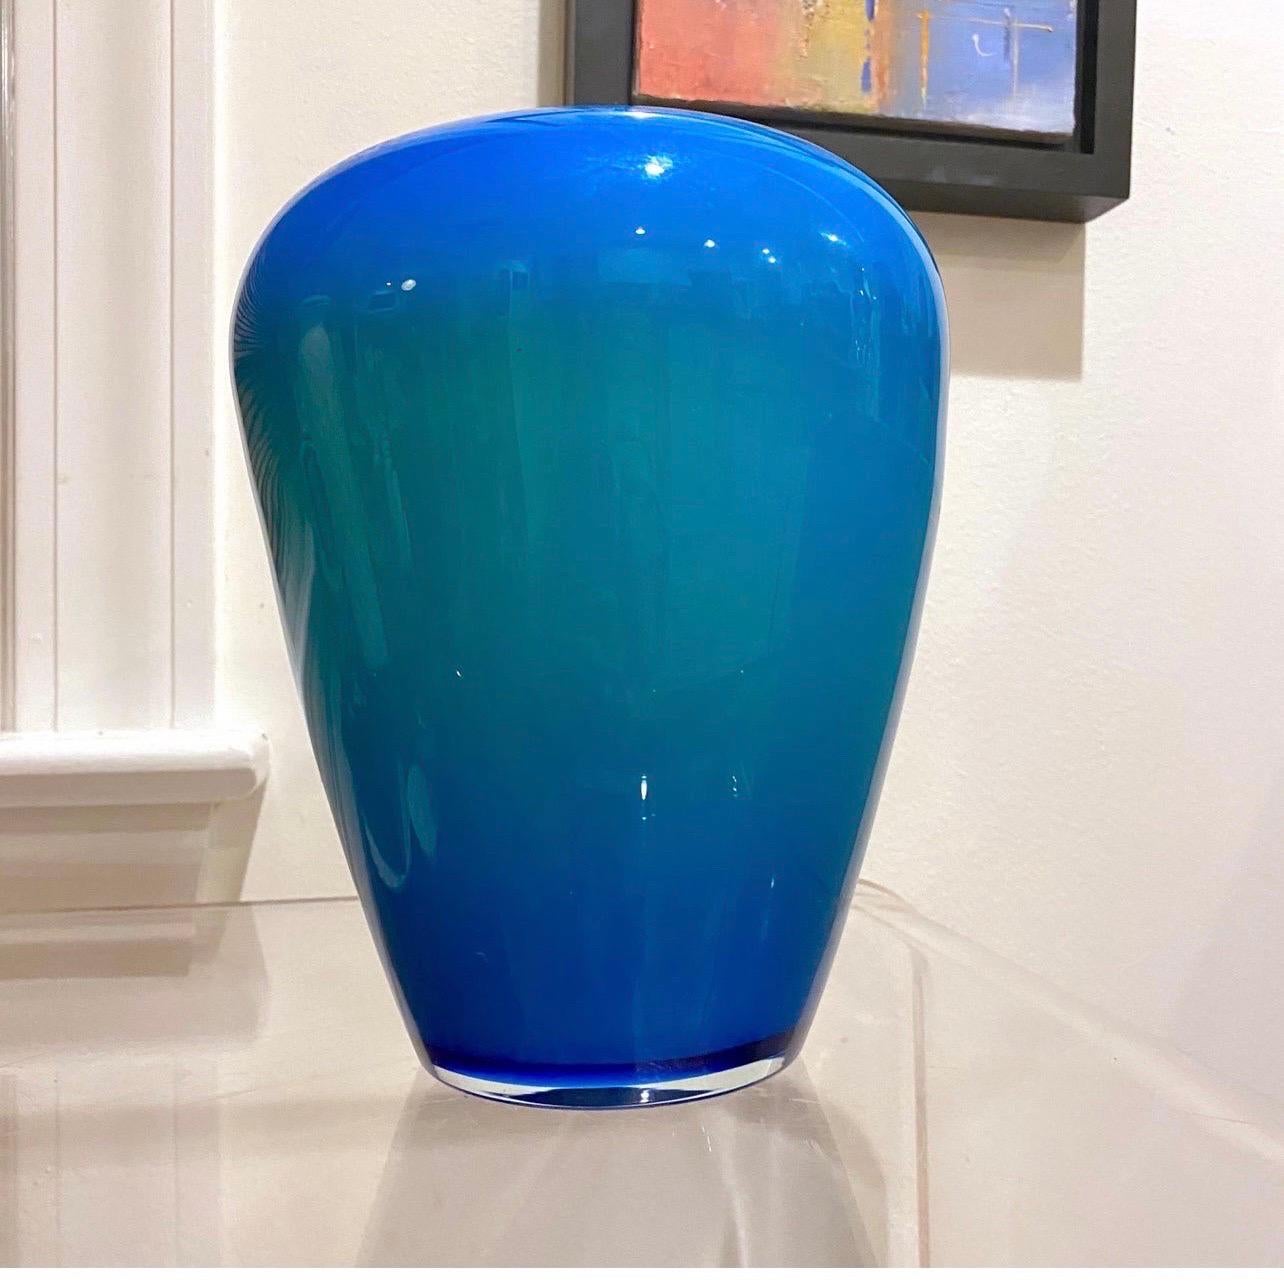 Exceptional vase, Isis model, created by Anja Kjaer for Holmegaard Royal Copenhagen, baluster shape with open neck, opaque blue and green glass inside. Perfect condition.